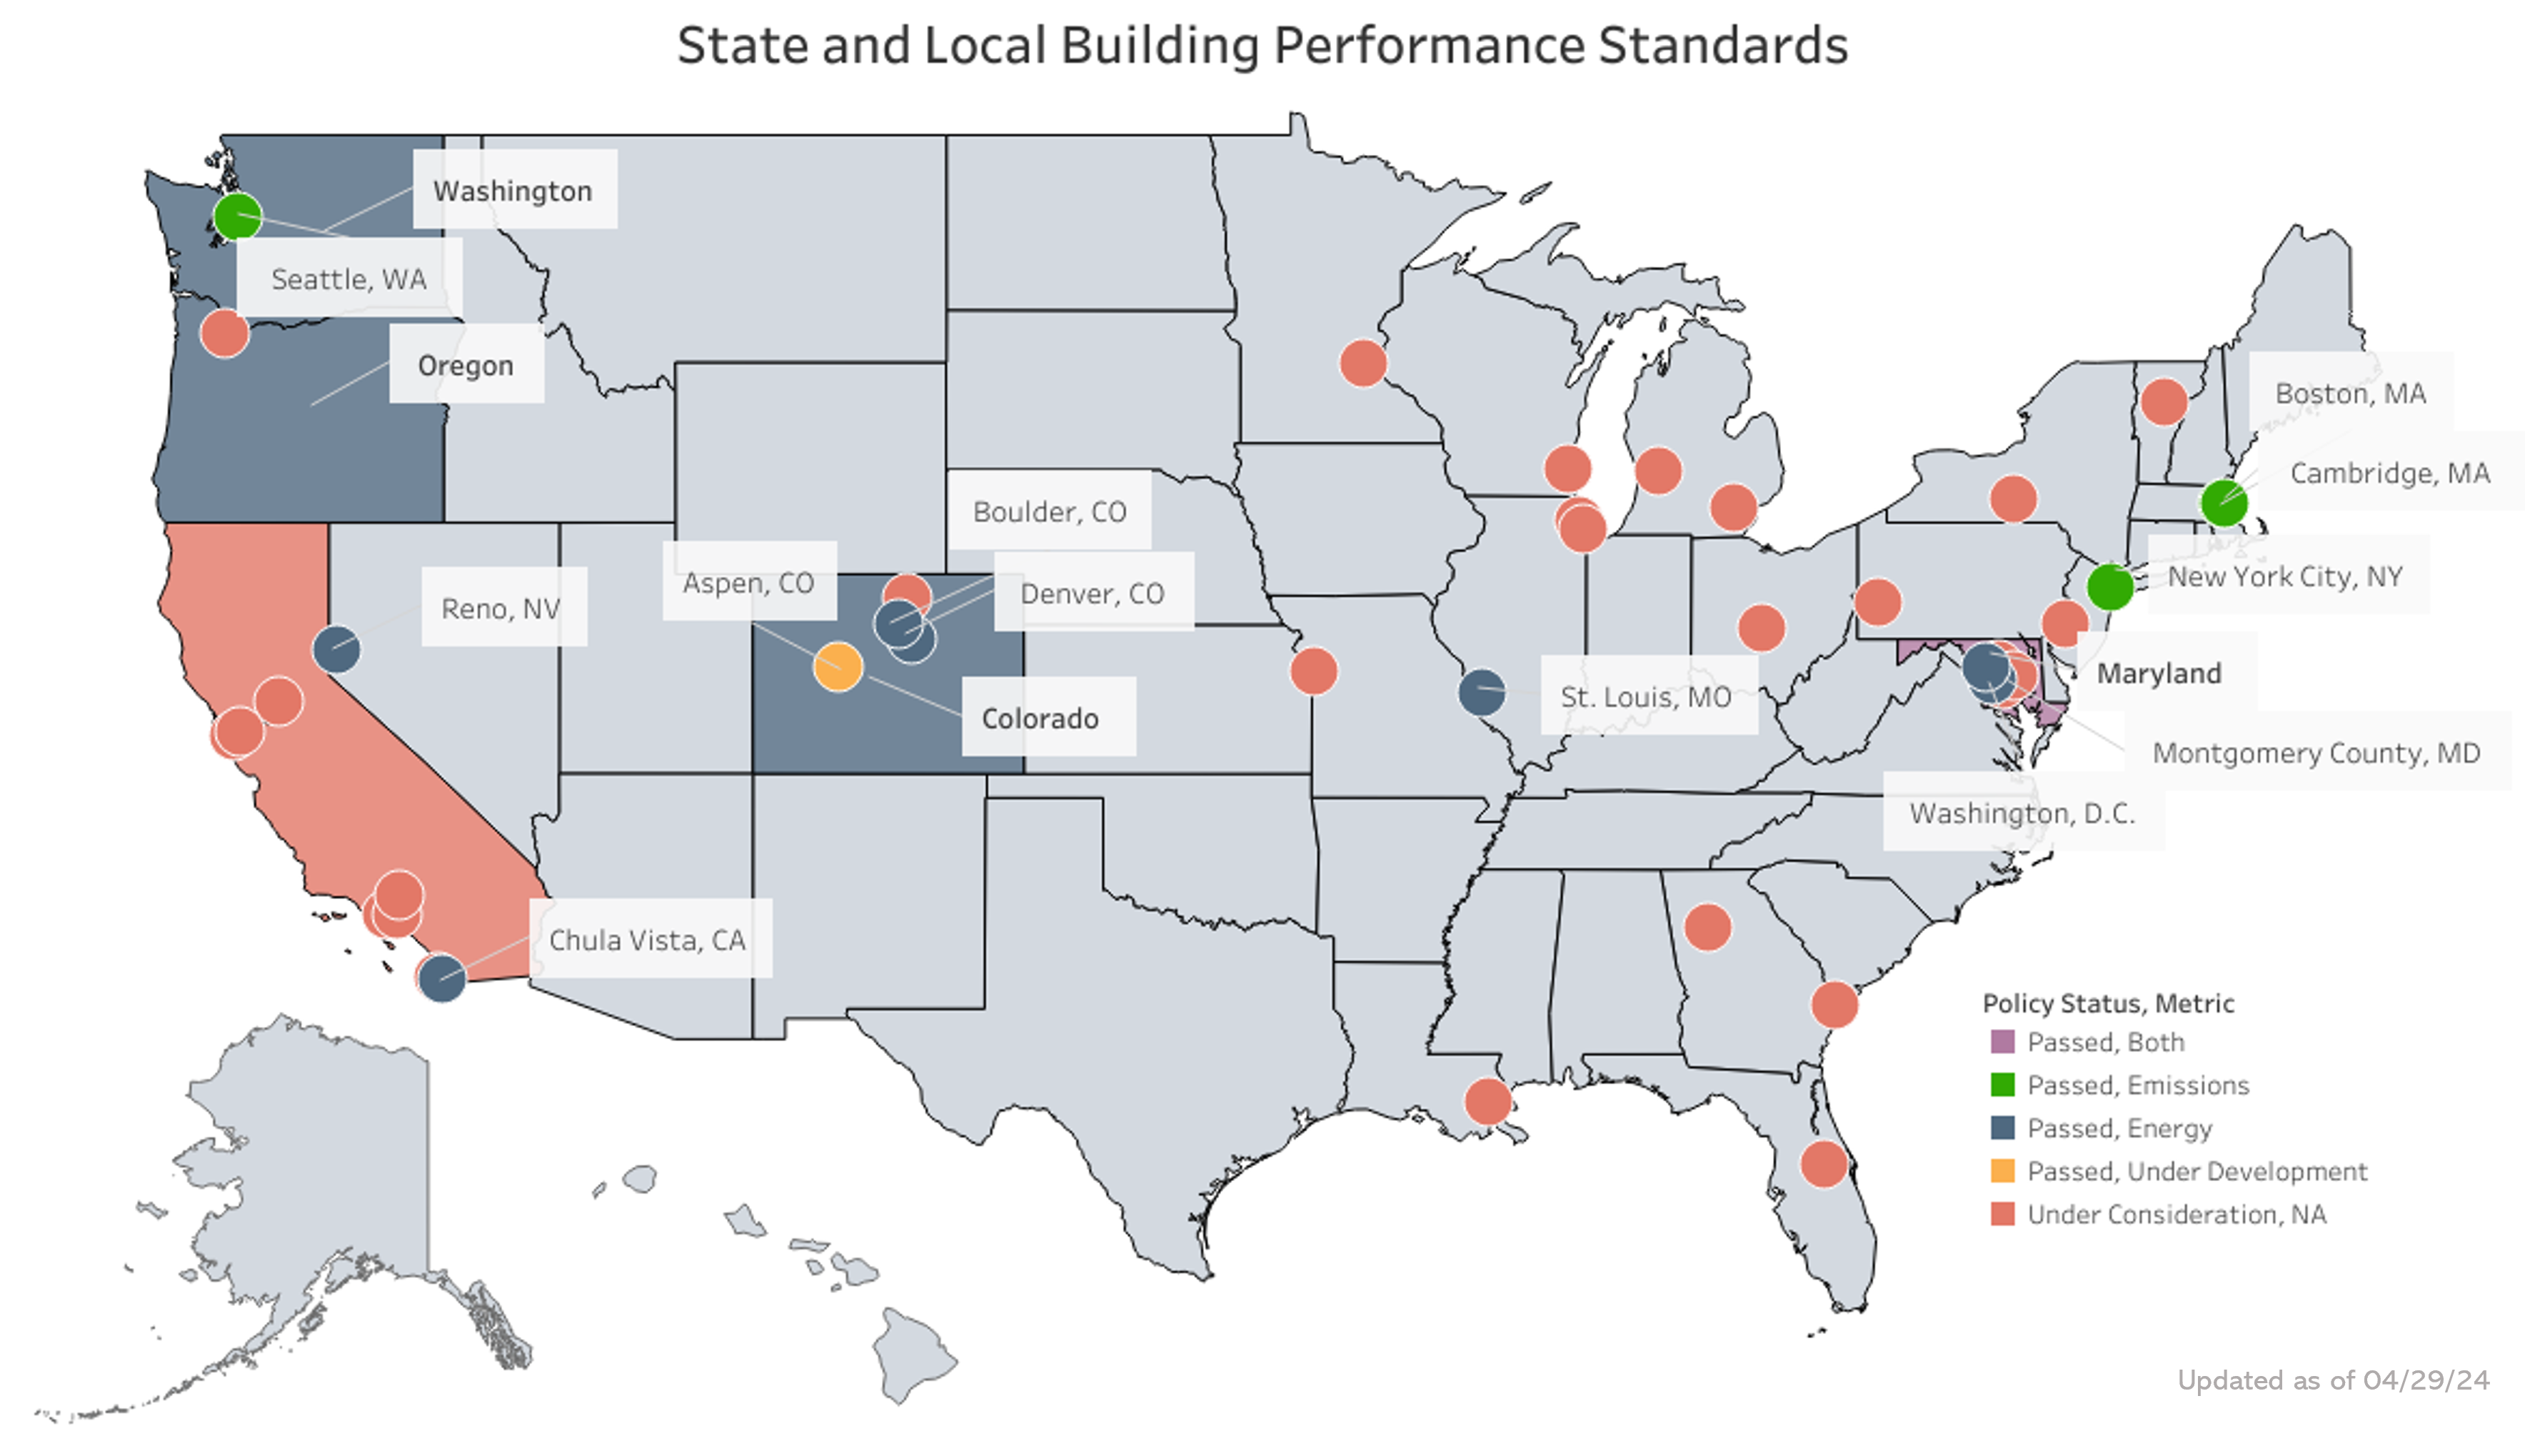 Map of State and Local Adoption of Building Performance Standards